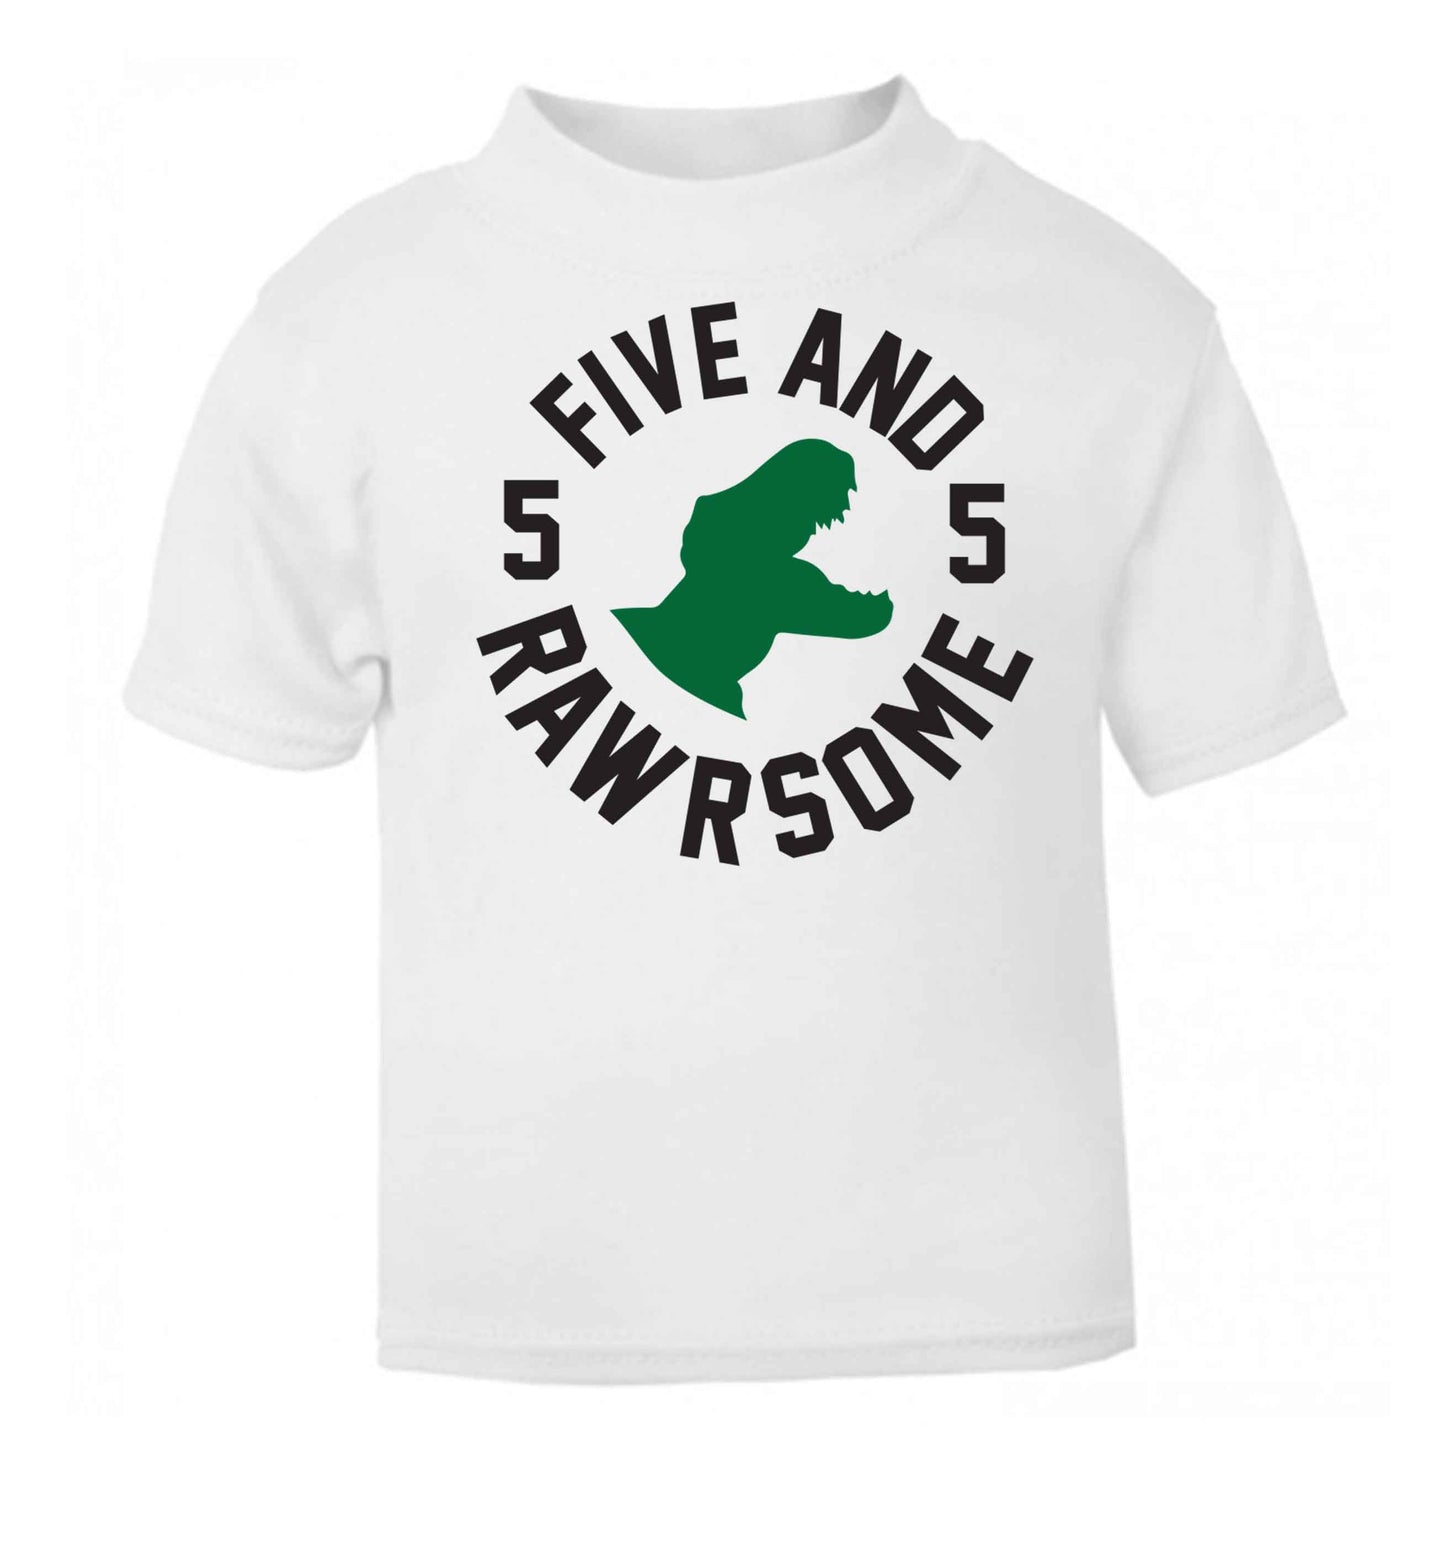 Five and rawrsome white baby toddler Tshirt 2 Years